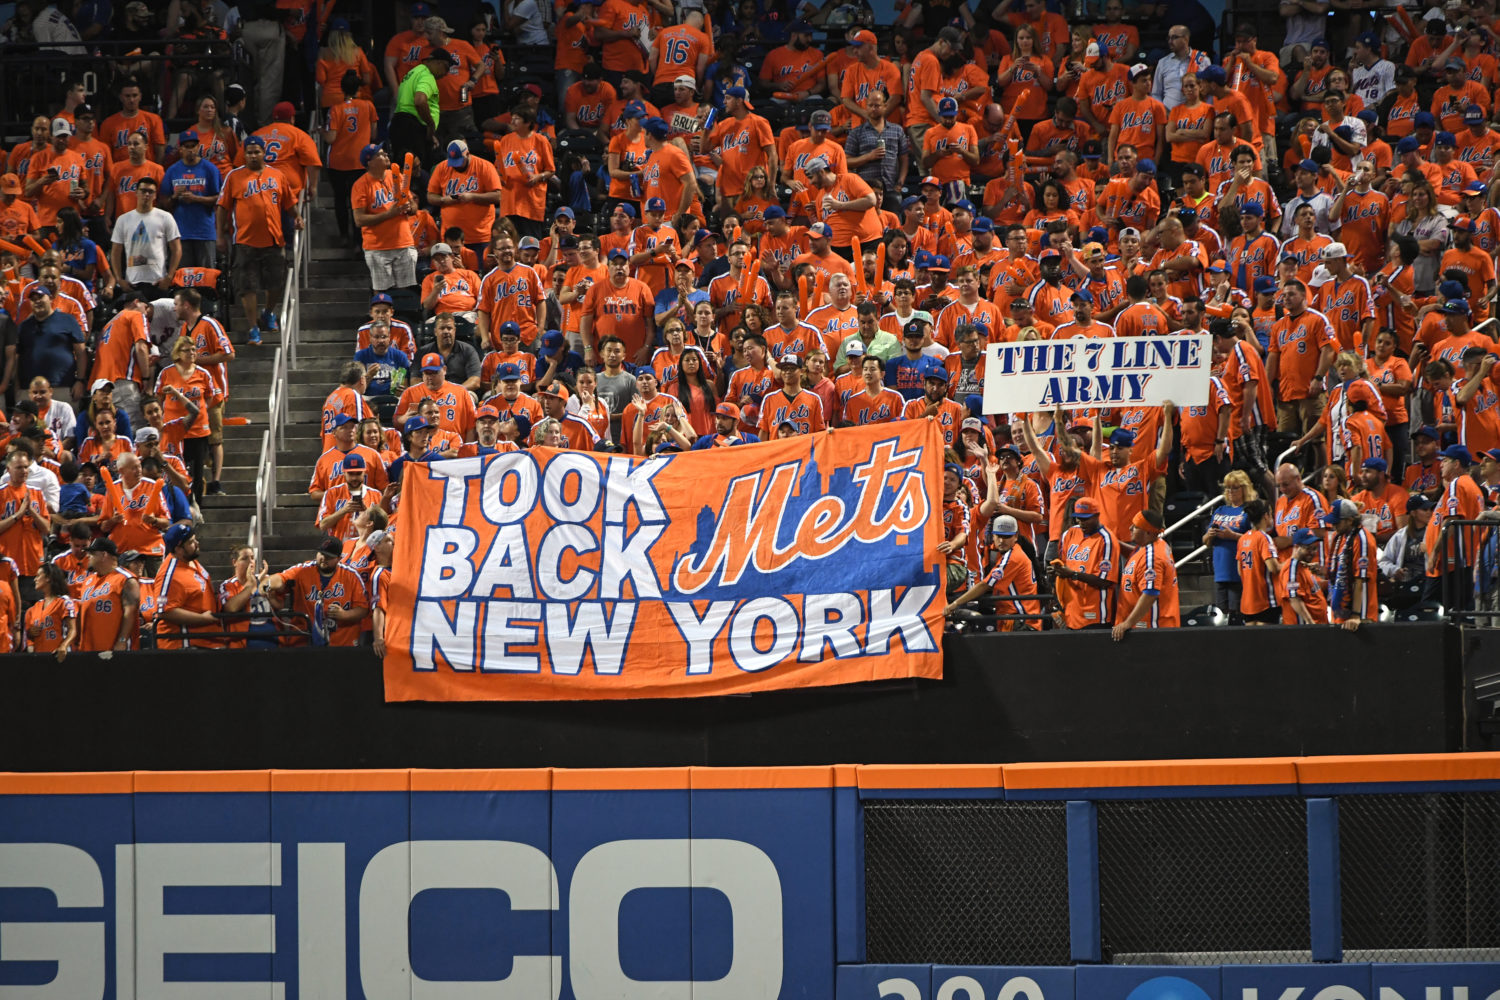 7 Line Army Supports Mets During Subway Series